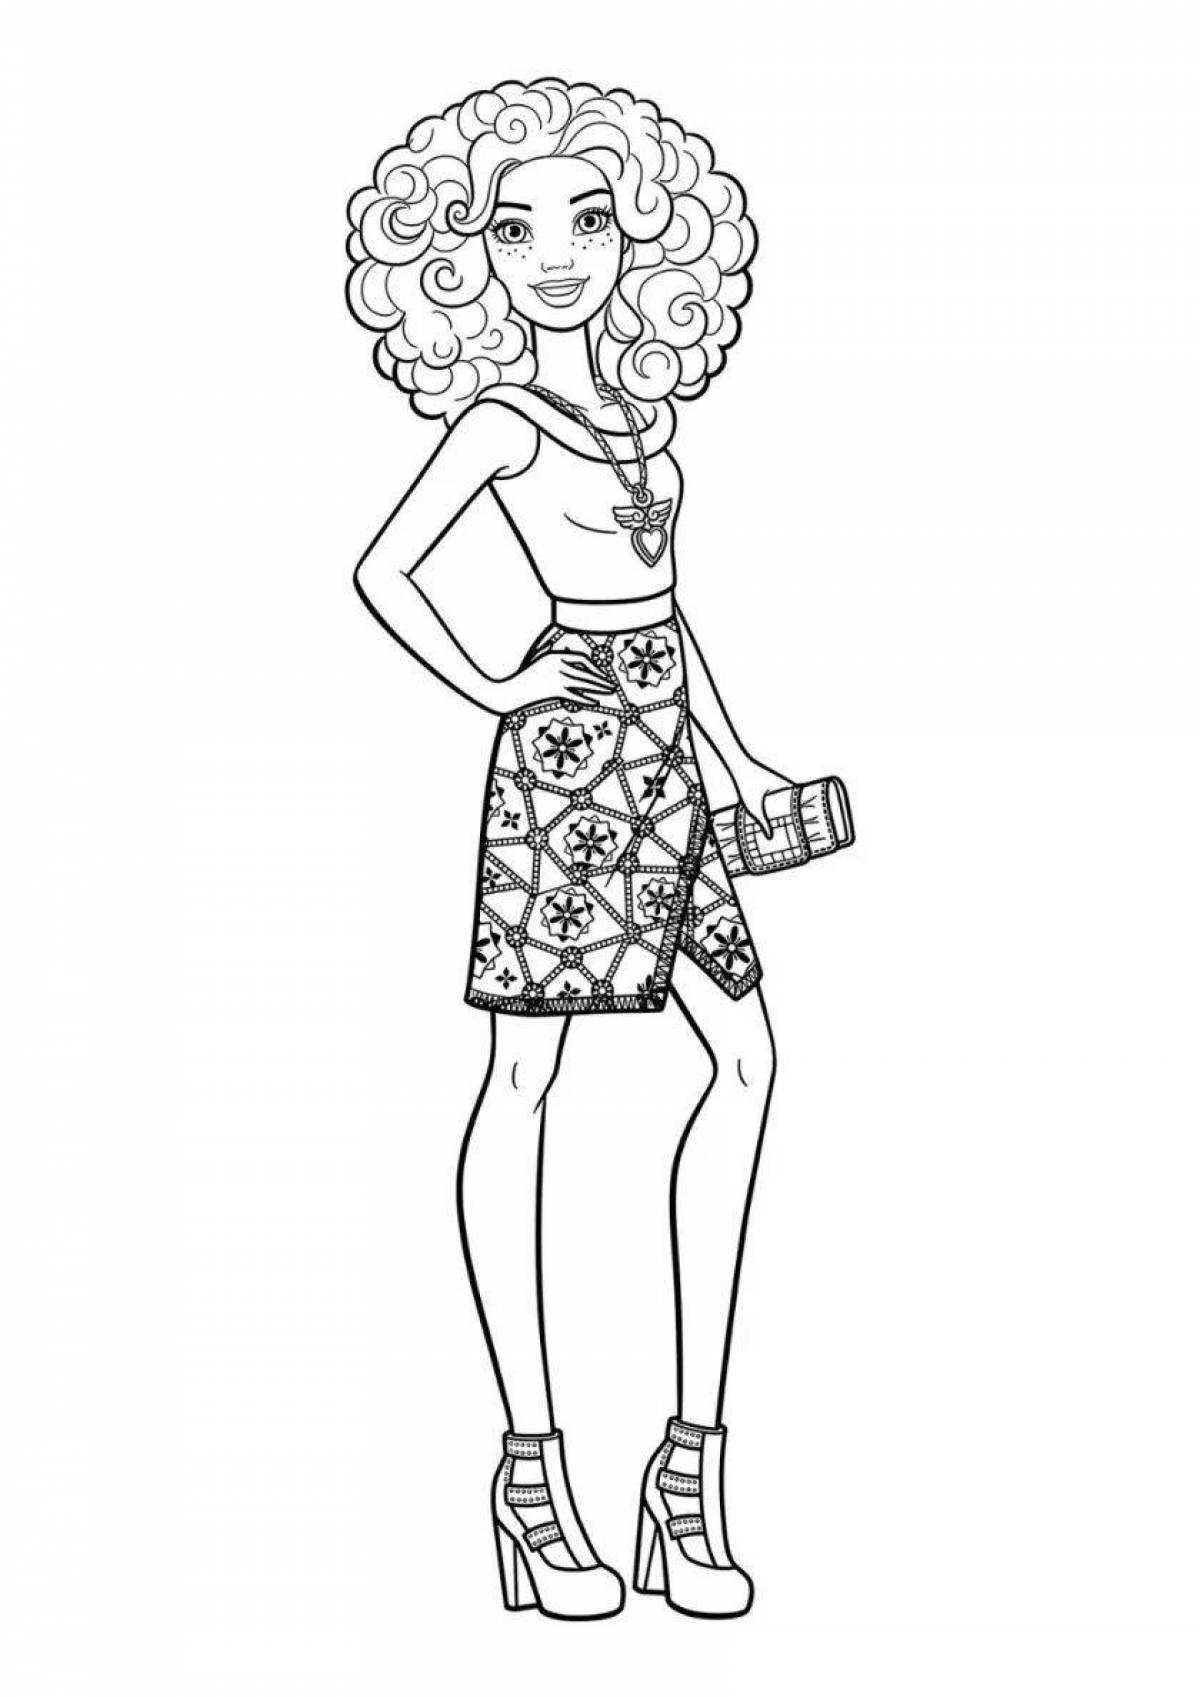 Fashionista doll cool coloring book